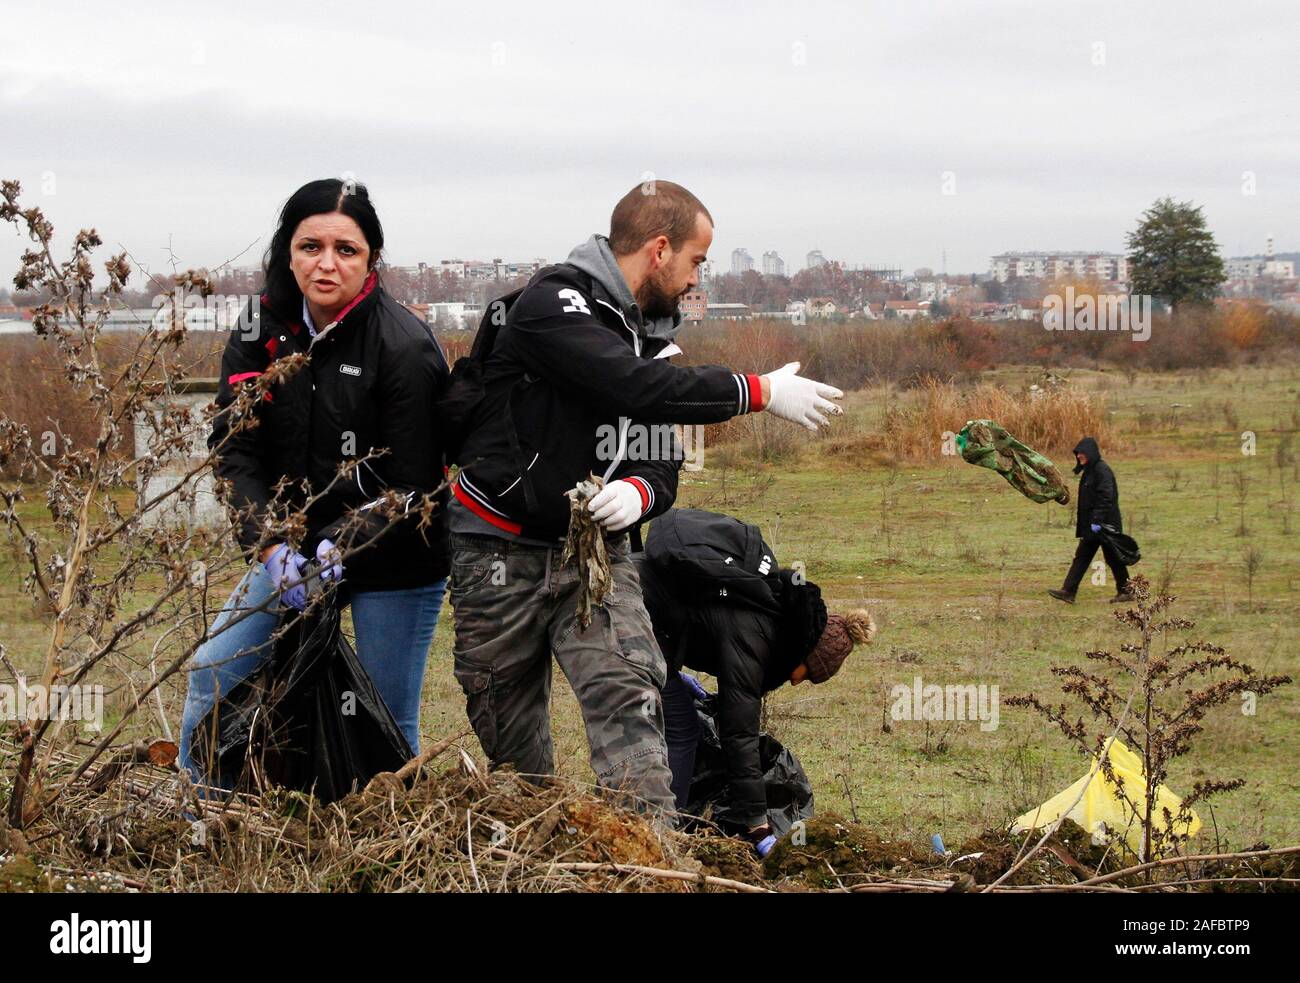 Skopje, North Macedonia. 14th Dec, 2019. People collect litters during a mass clean-up campaign about 2 kilometers north-west from the center of Skopje, North Macedonia, Dec. 14, 2019. Thousands of citizens joined the mass clean-up campaign organized by the government of North Macedonia on Saturday. Credit: Darko Duridanski/Xinhua/Alamy Live News Stock Photo